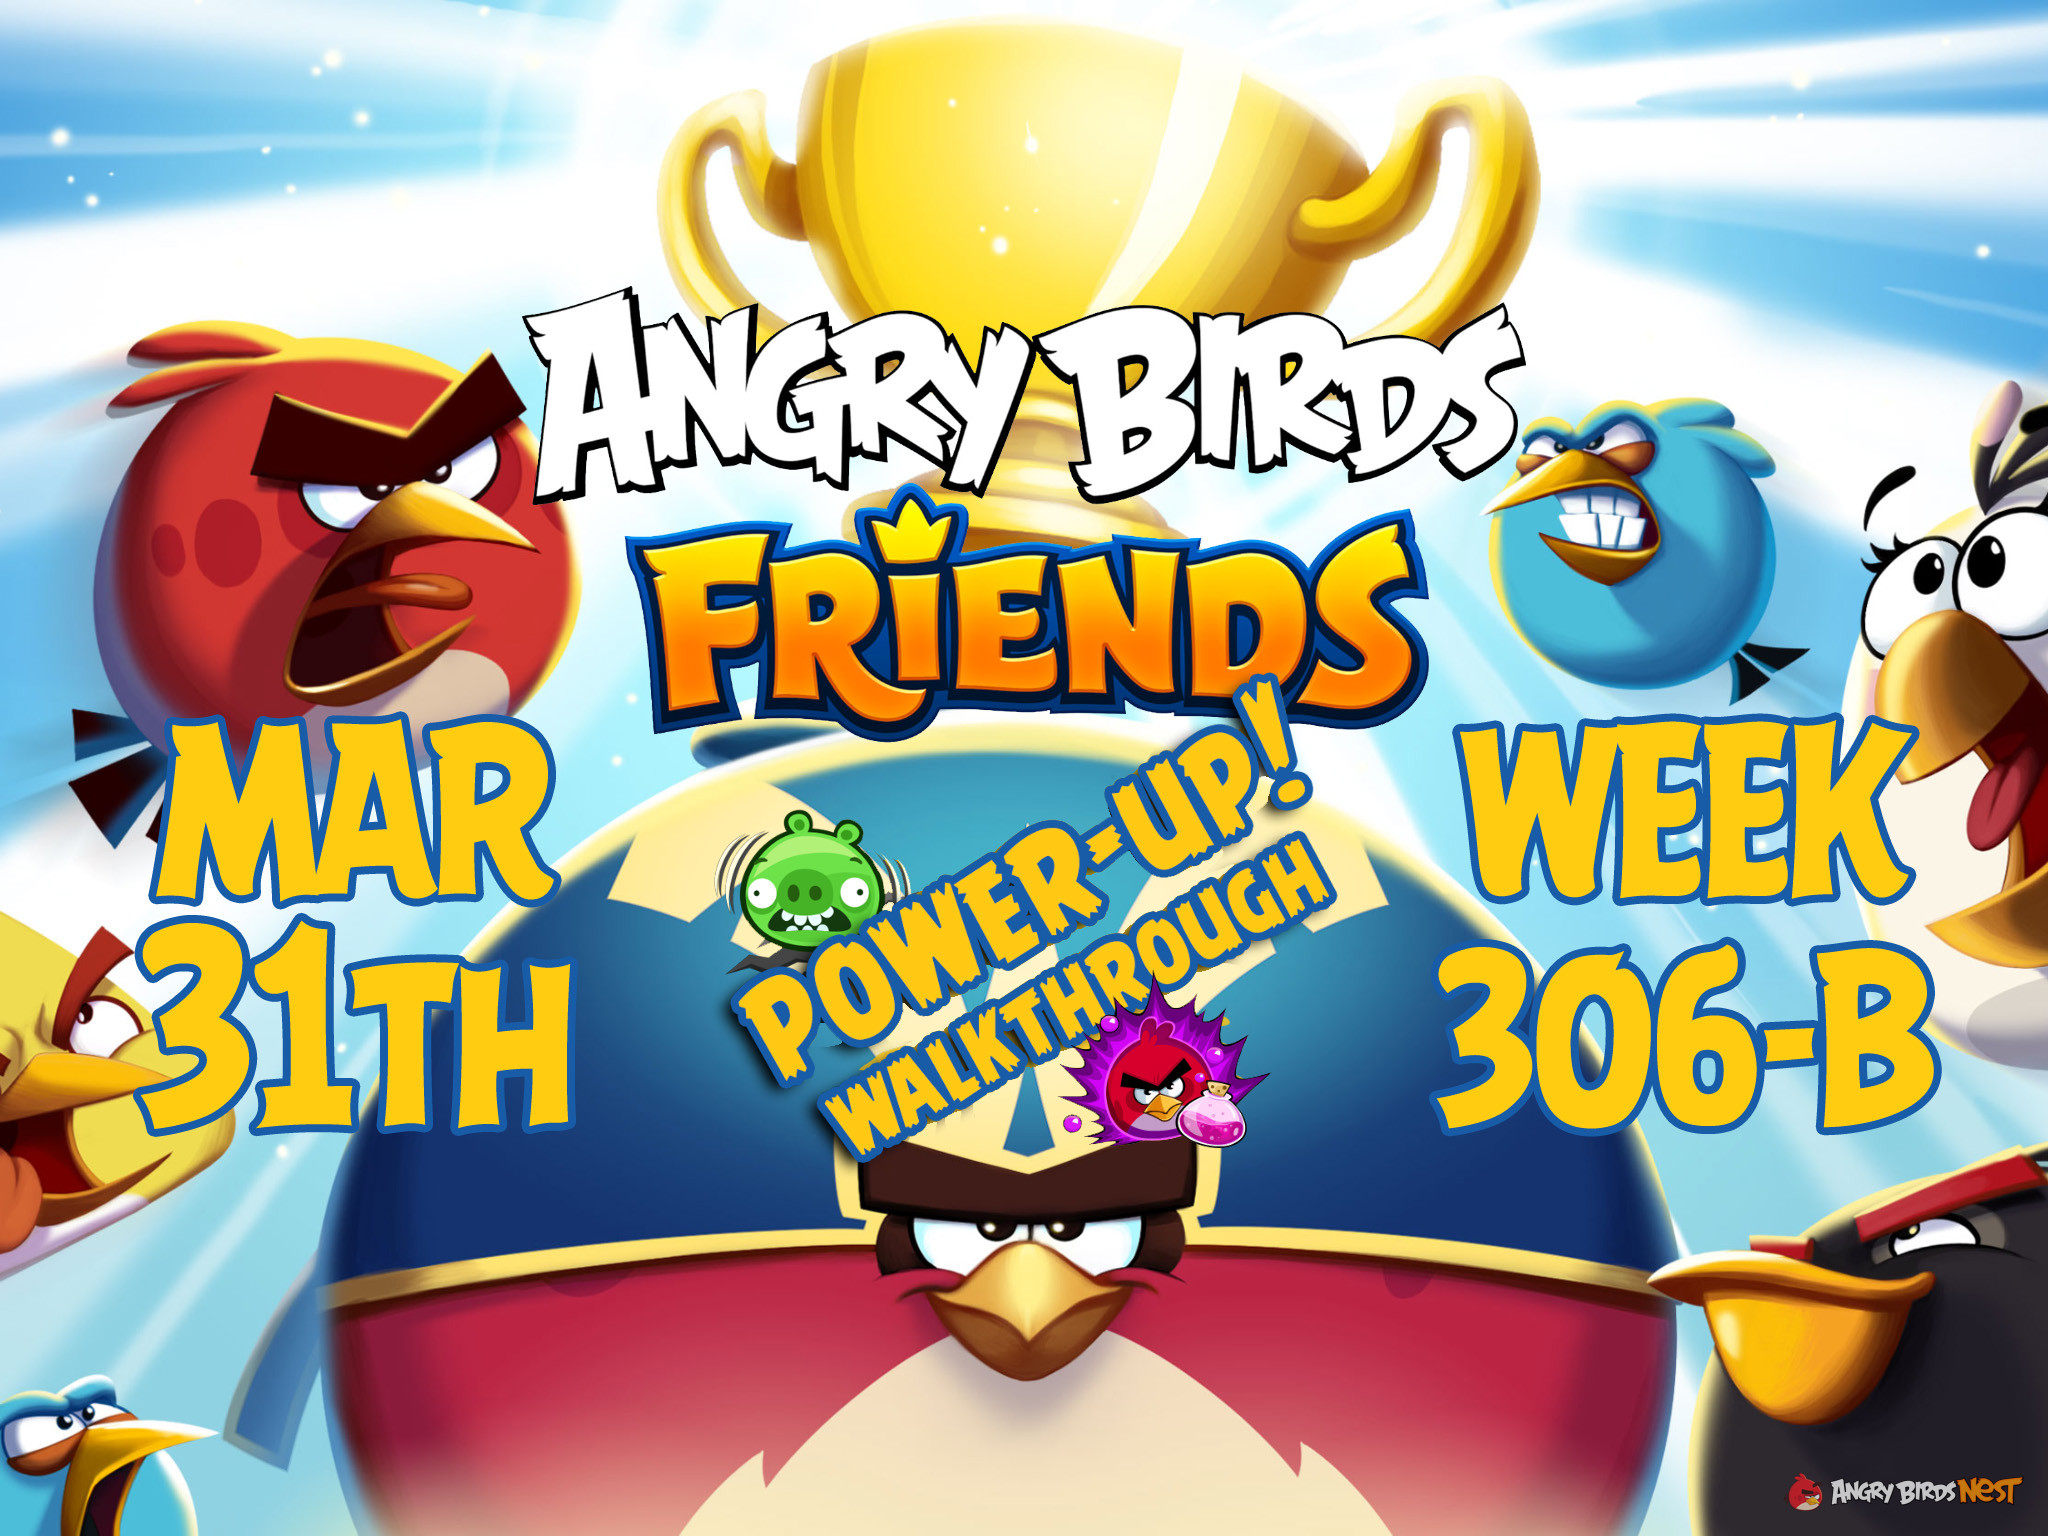 Angry Birds Friends Tournament Week 306-B Feature Image PU